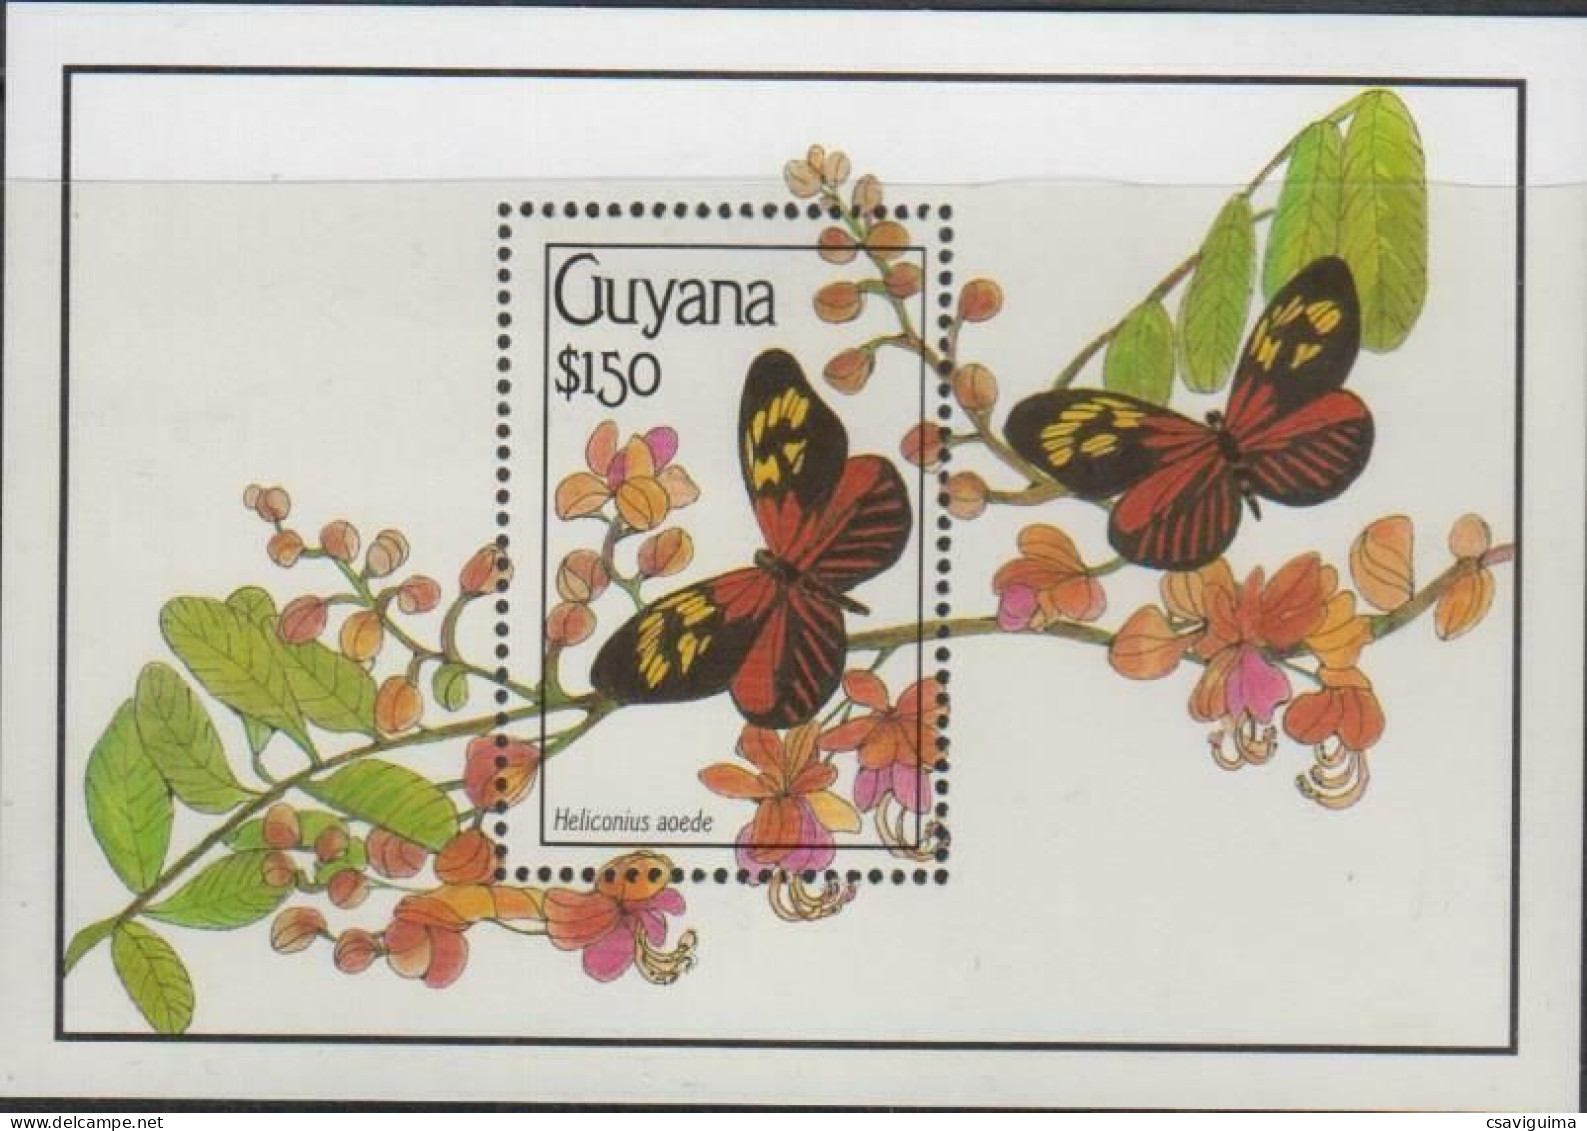 Guyana - 1990 - Insects: Butterflies - Yv Bf 48 - Butterflies